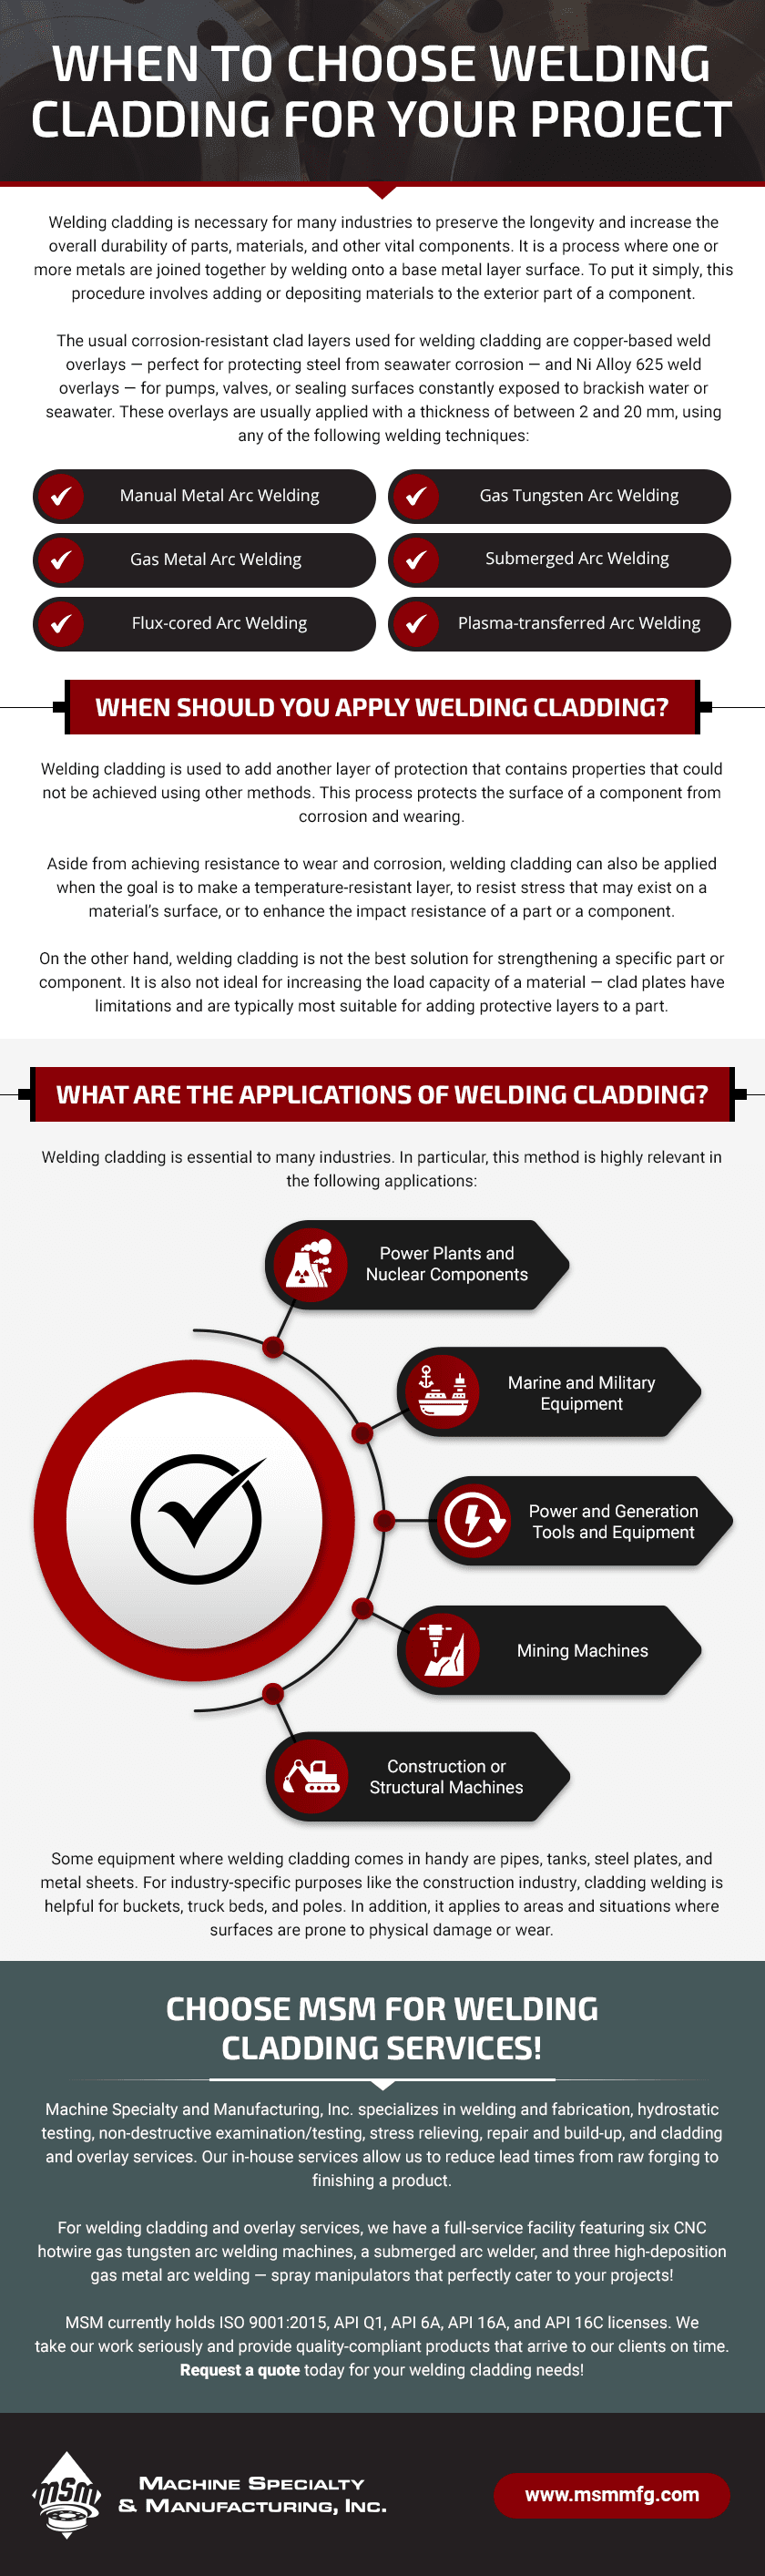 When-To-Choose-Welding-Cladding-for-Your-Project